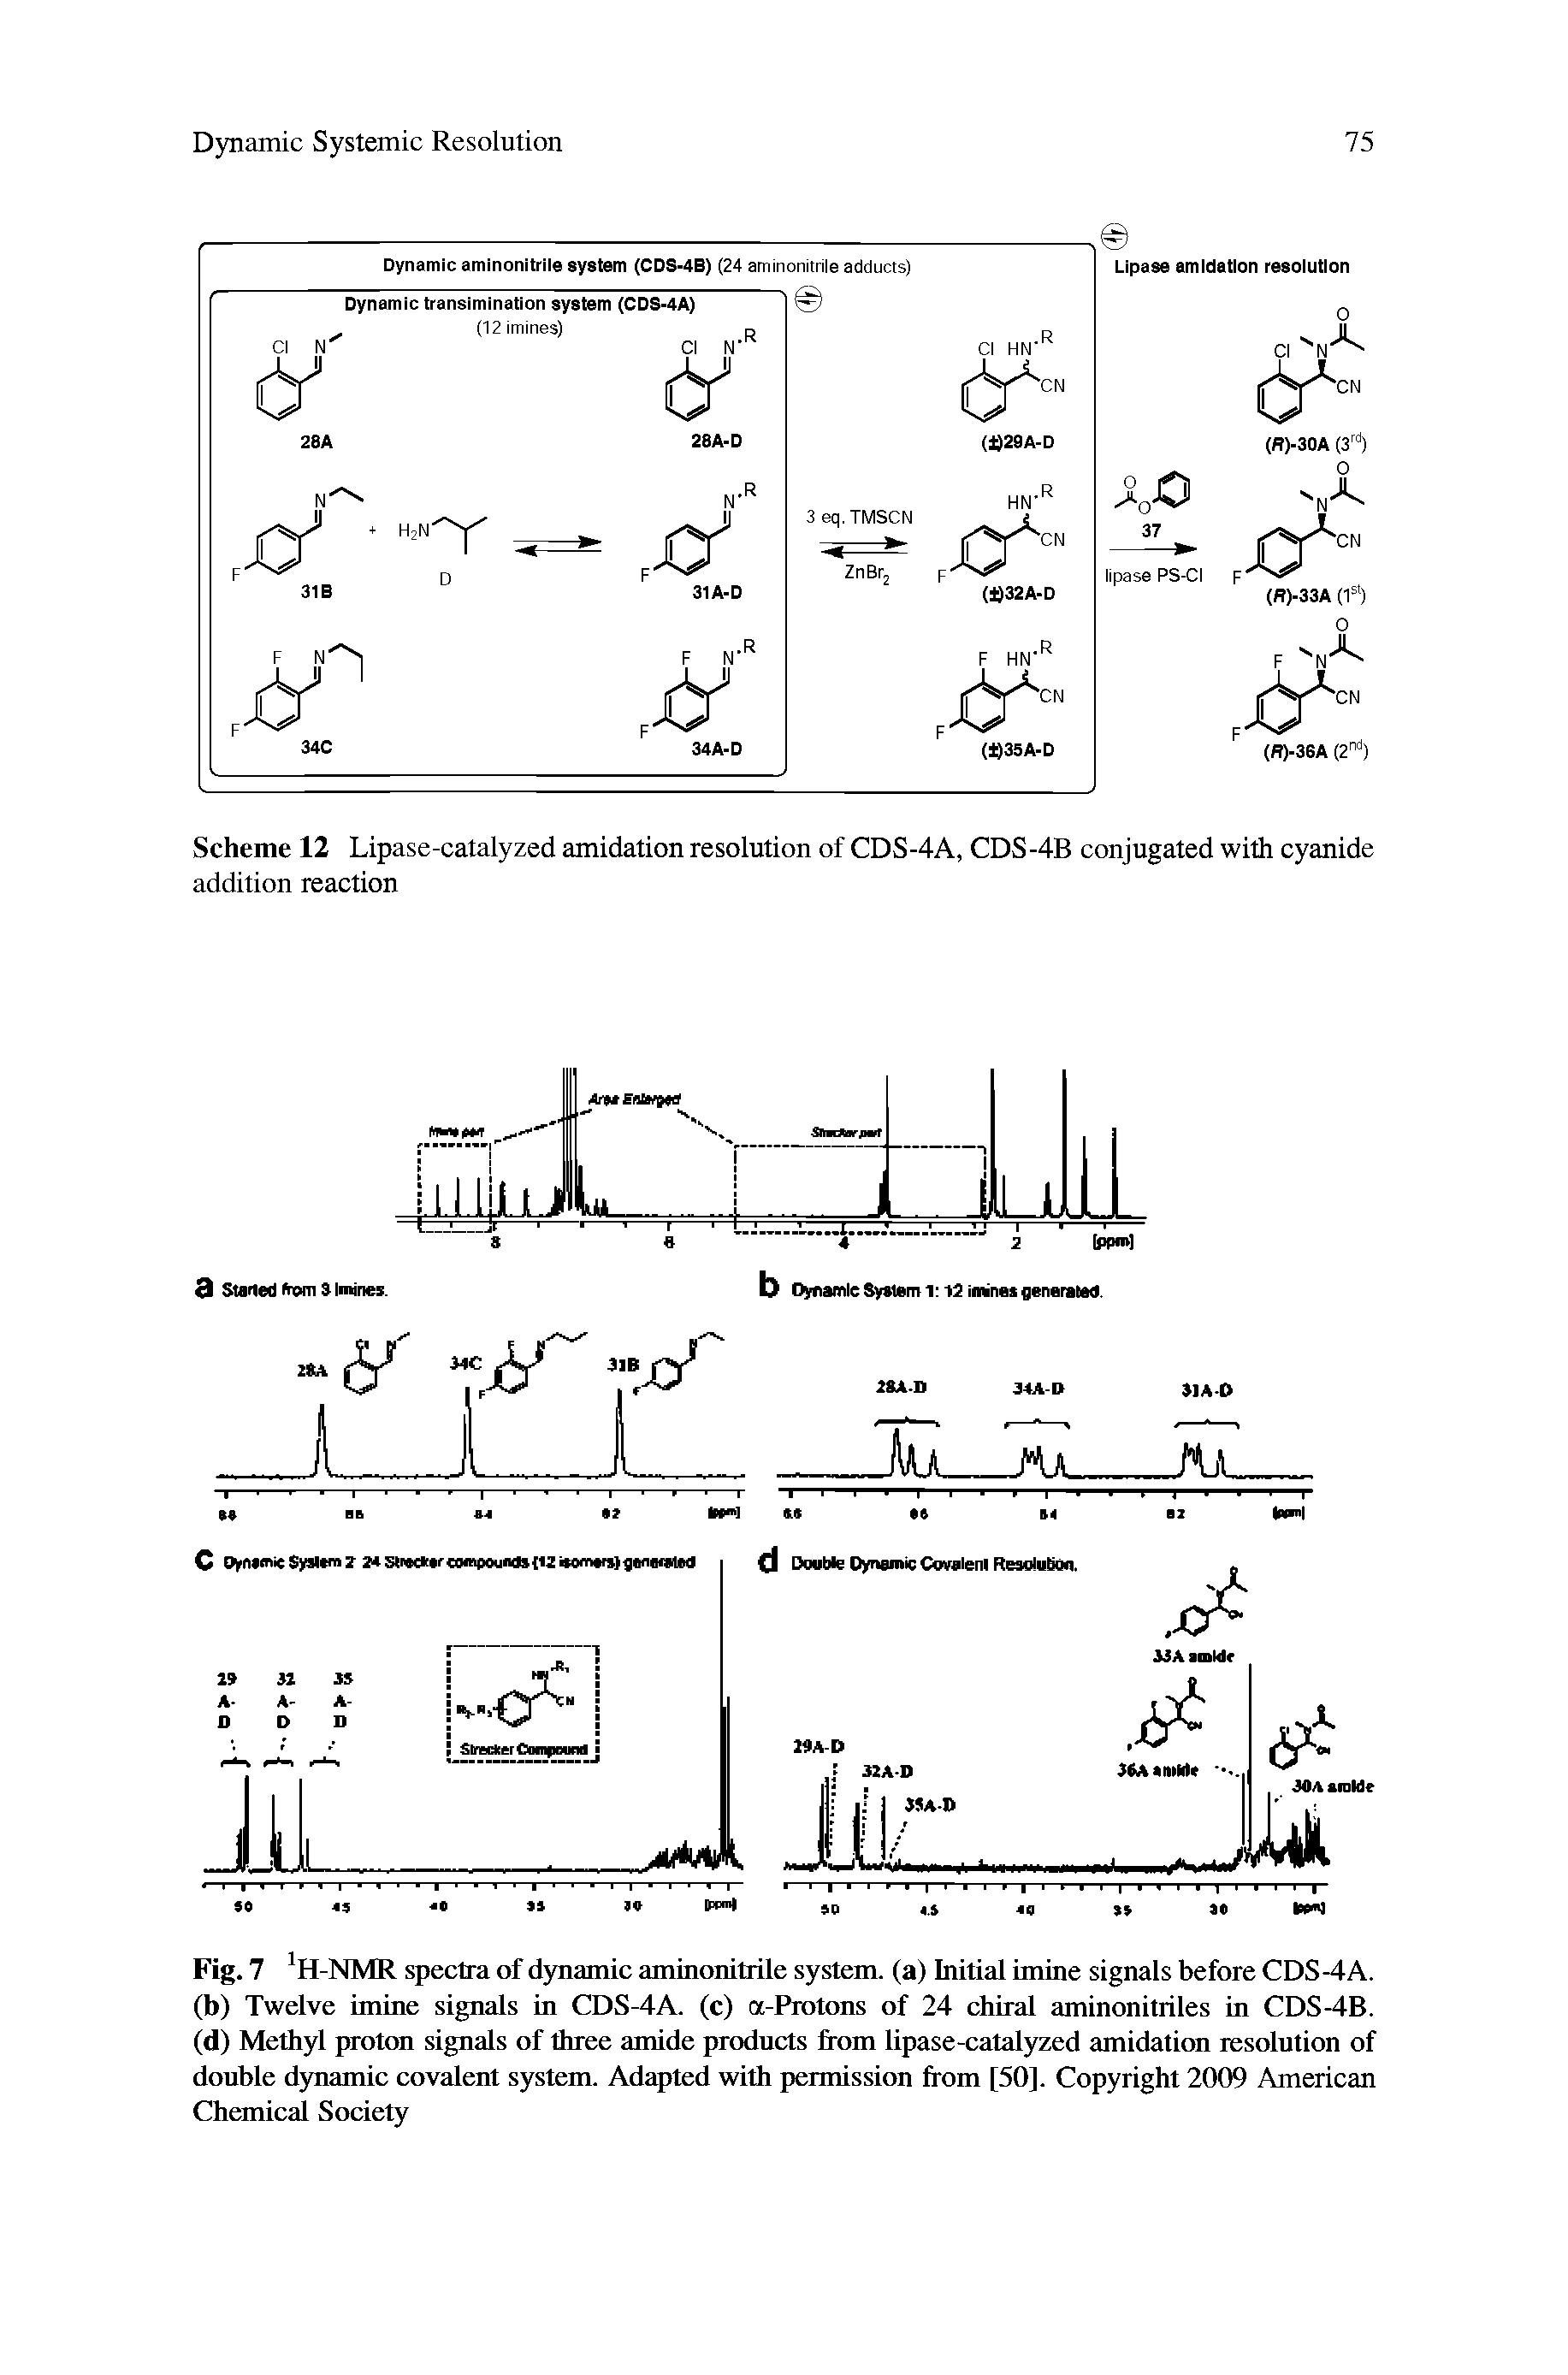 Fig. 7 1H-NMR spectra of dynamic aminonitrile system, (a) Initial inline signals before CDS-4A. (b) Twelve inline signals in CDS-4A. (c) a-Protons of 24 chiral aminonitriles in CDS-4B. (d) Methyl proton signals of three amide products from lipase-catalyzed amidation resolution of double dynamic covalent system. Adapted with permission from [50]. Copyright 2009 American Chemical Society...